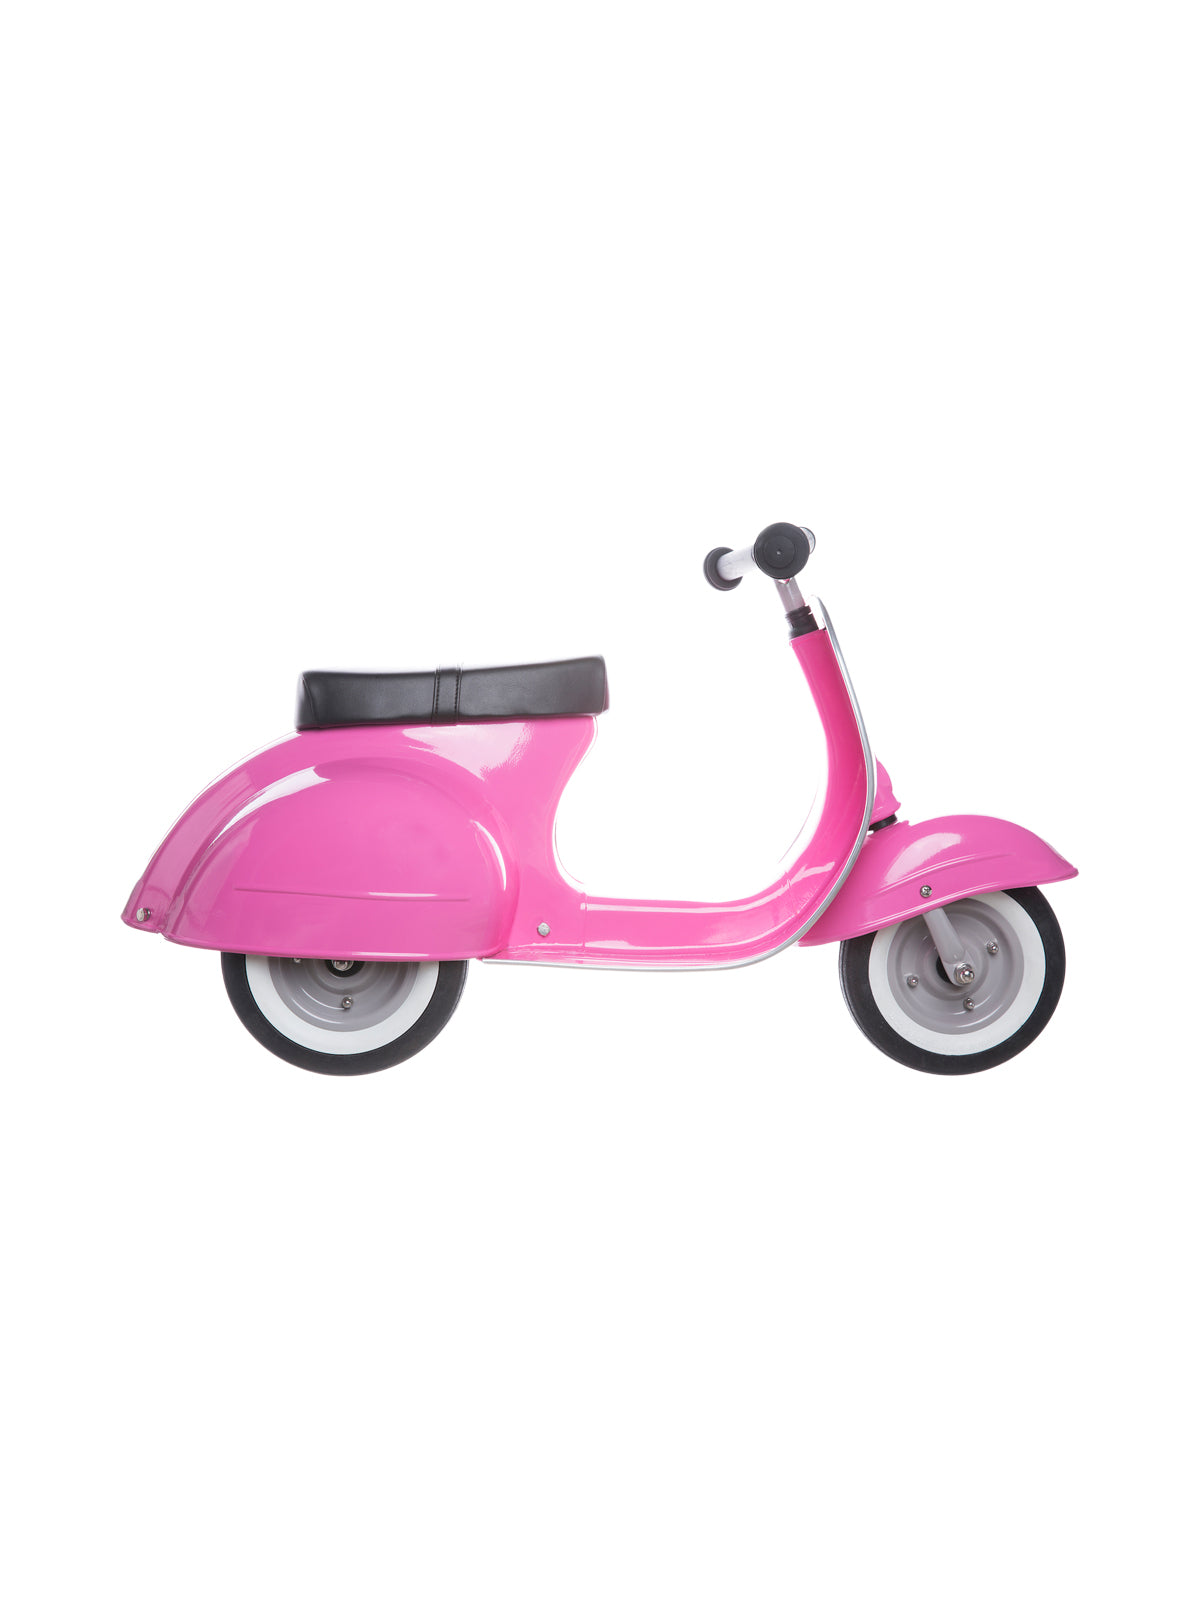 Pink scooter miniature, vintage, collectible, pink retro scooter, tin and